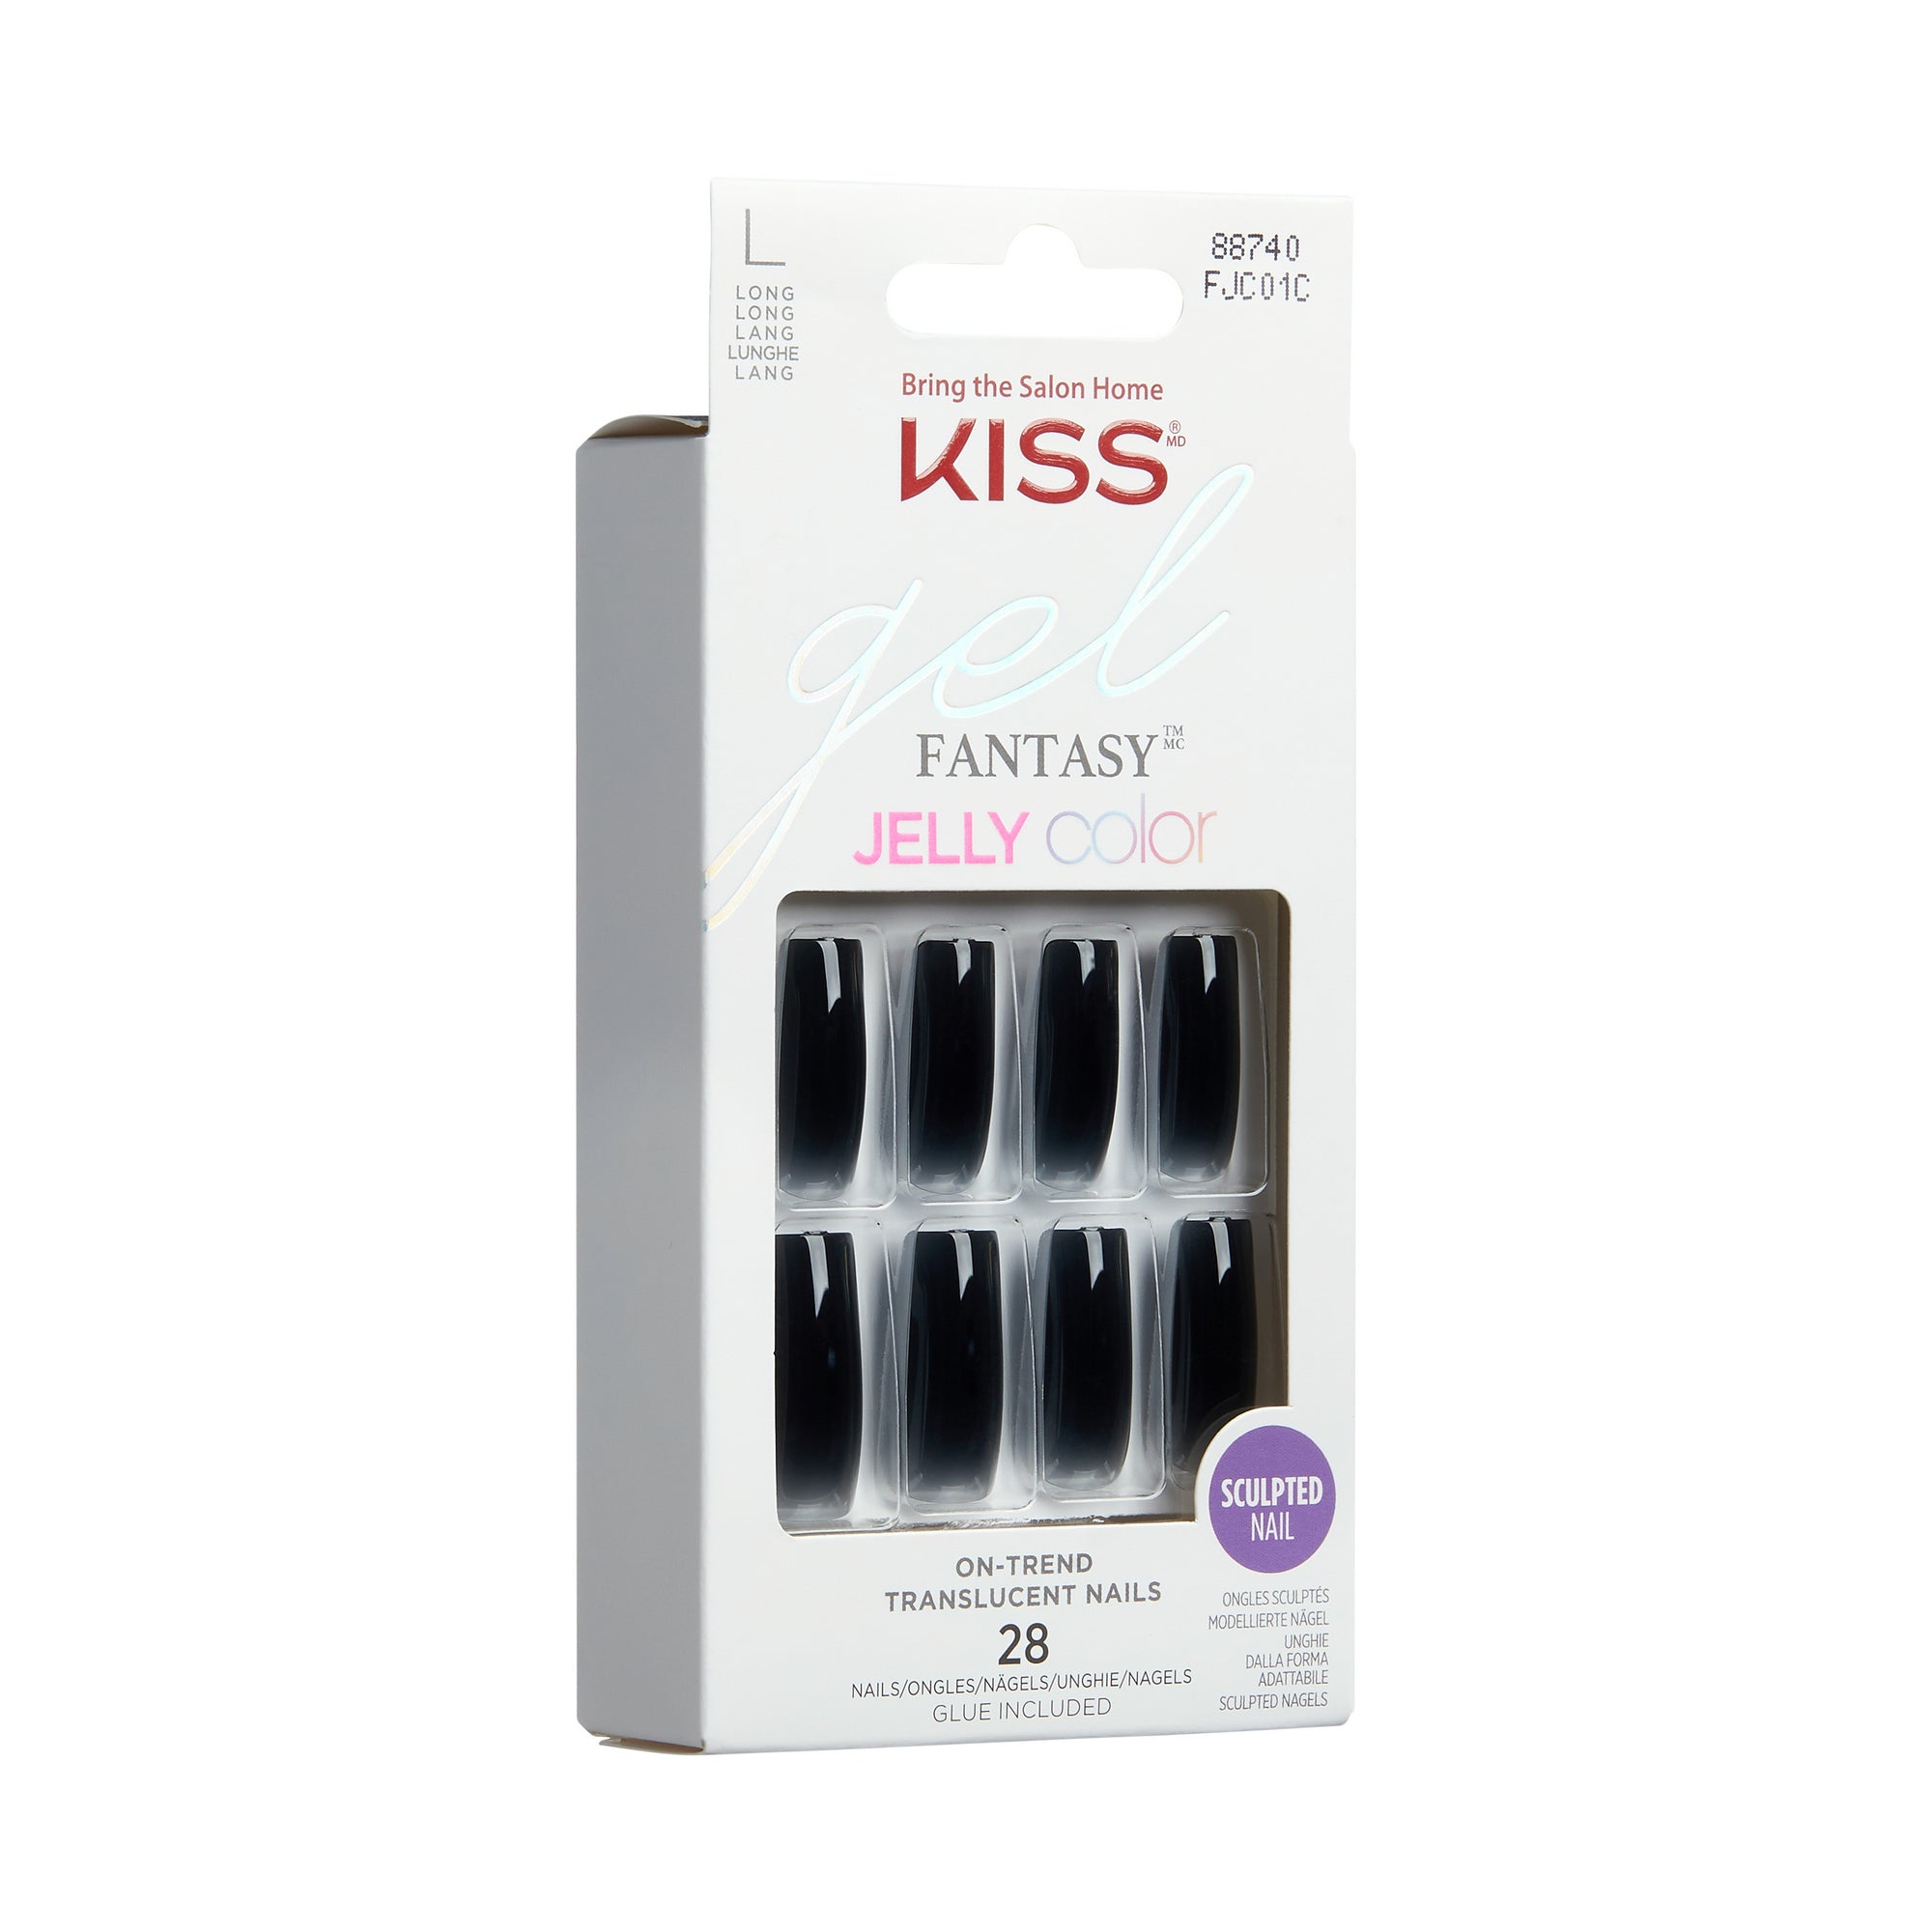 KISS JELLY FANTASY NAILS JELLY GELEE Packshot 2